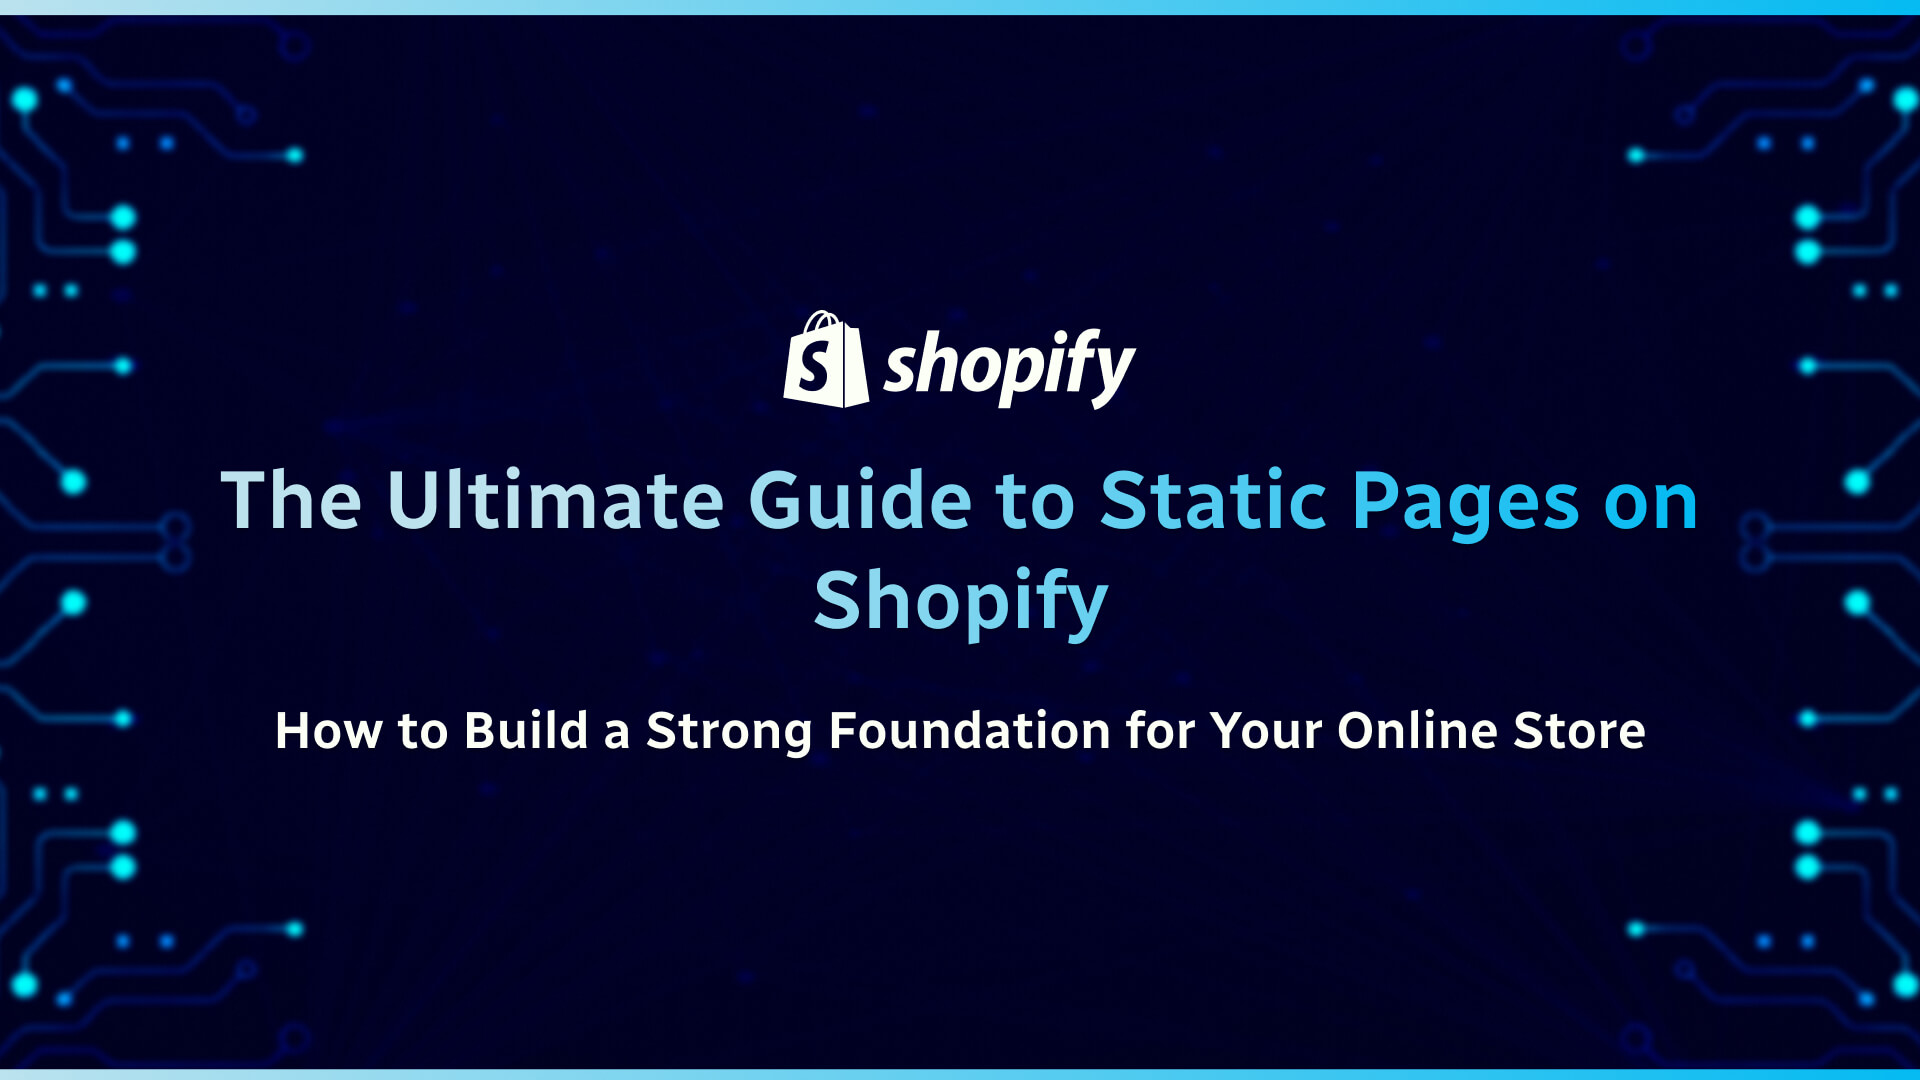 The Ultimate Guide to Static Pages on Shopify: How to Build a Strong Foundation for Your Online Store